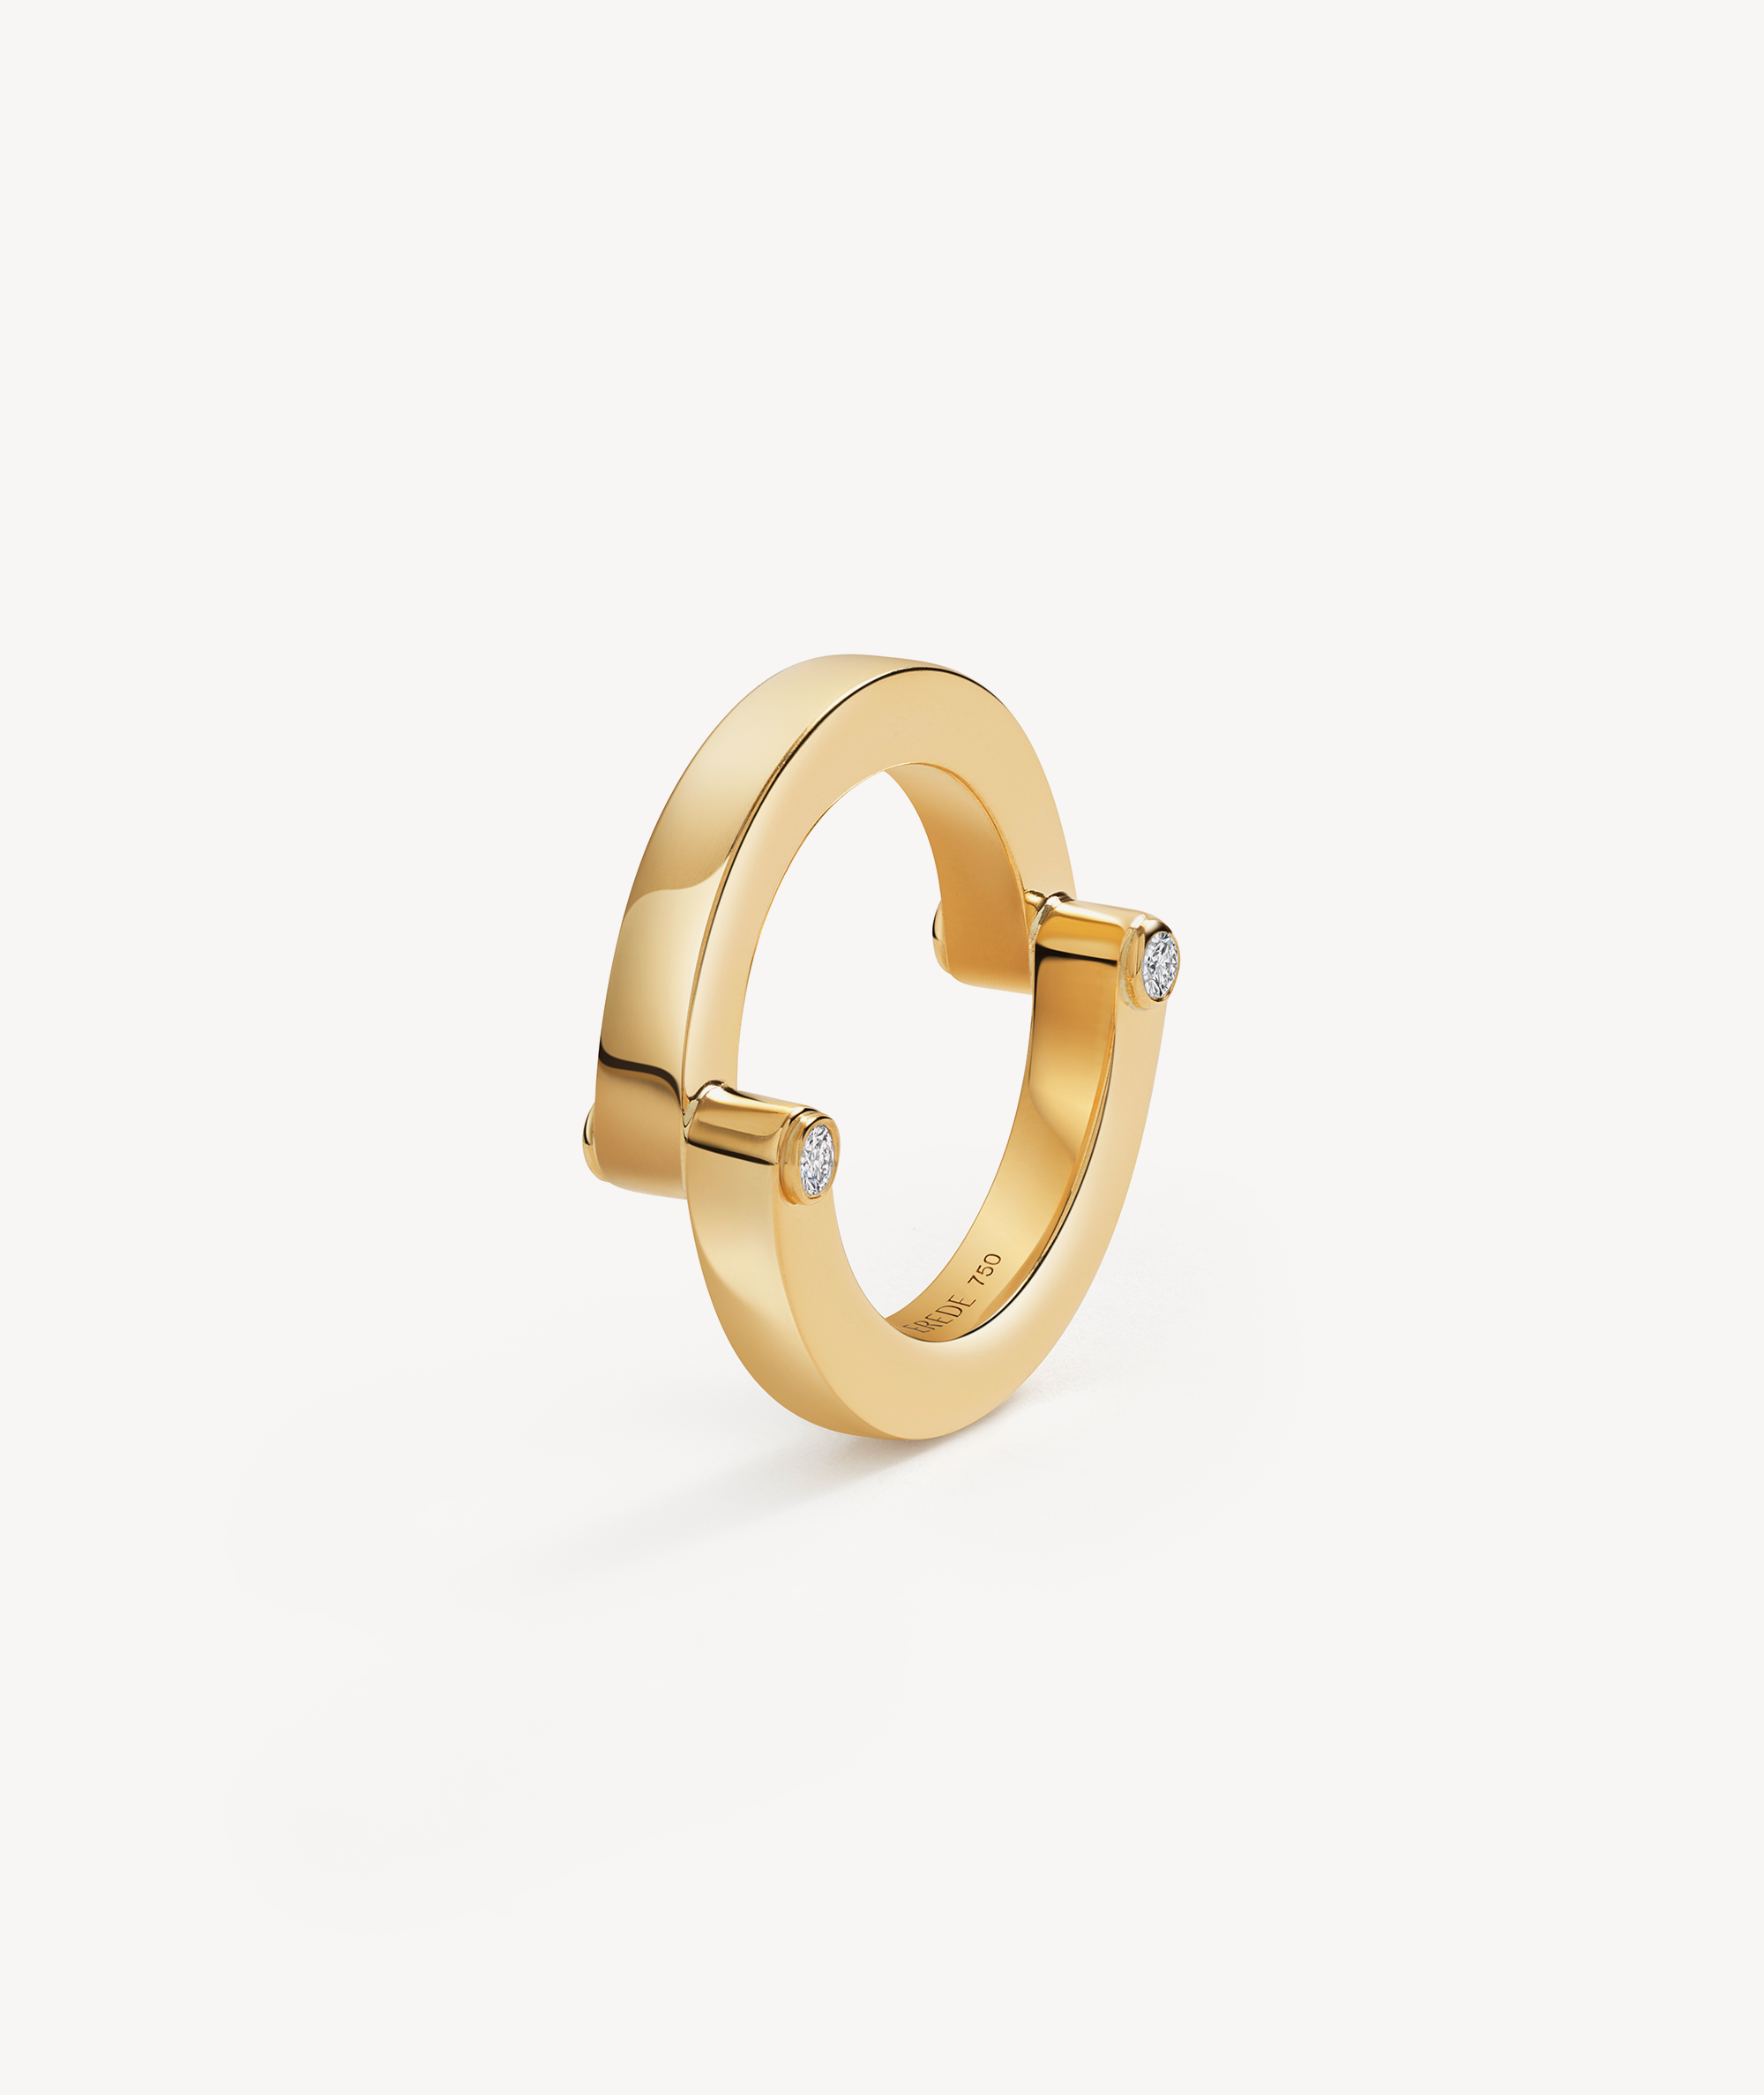 EREDE ring in 18k recycled yellow gold and lab-grown diamonds.